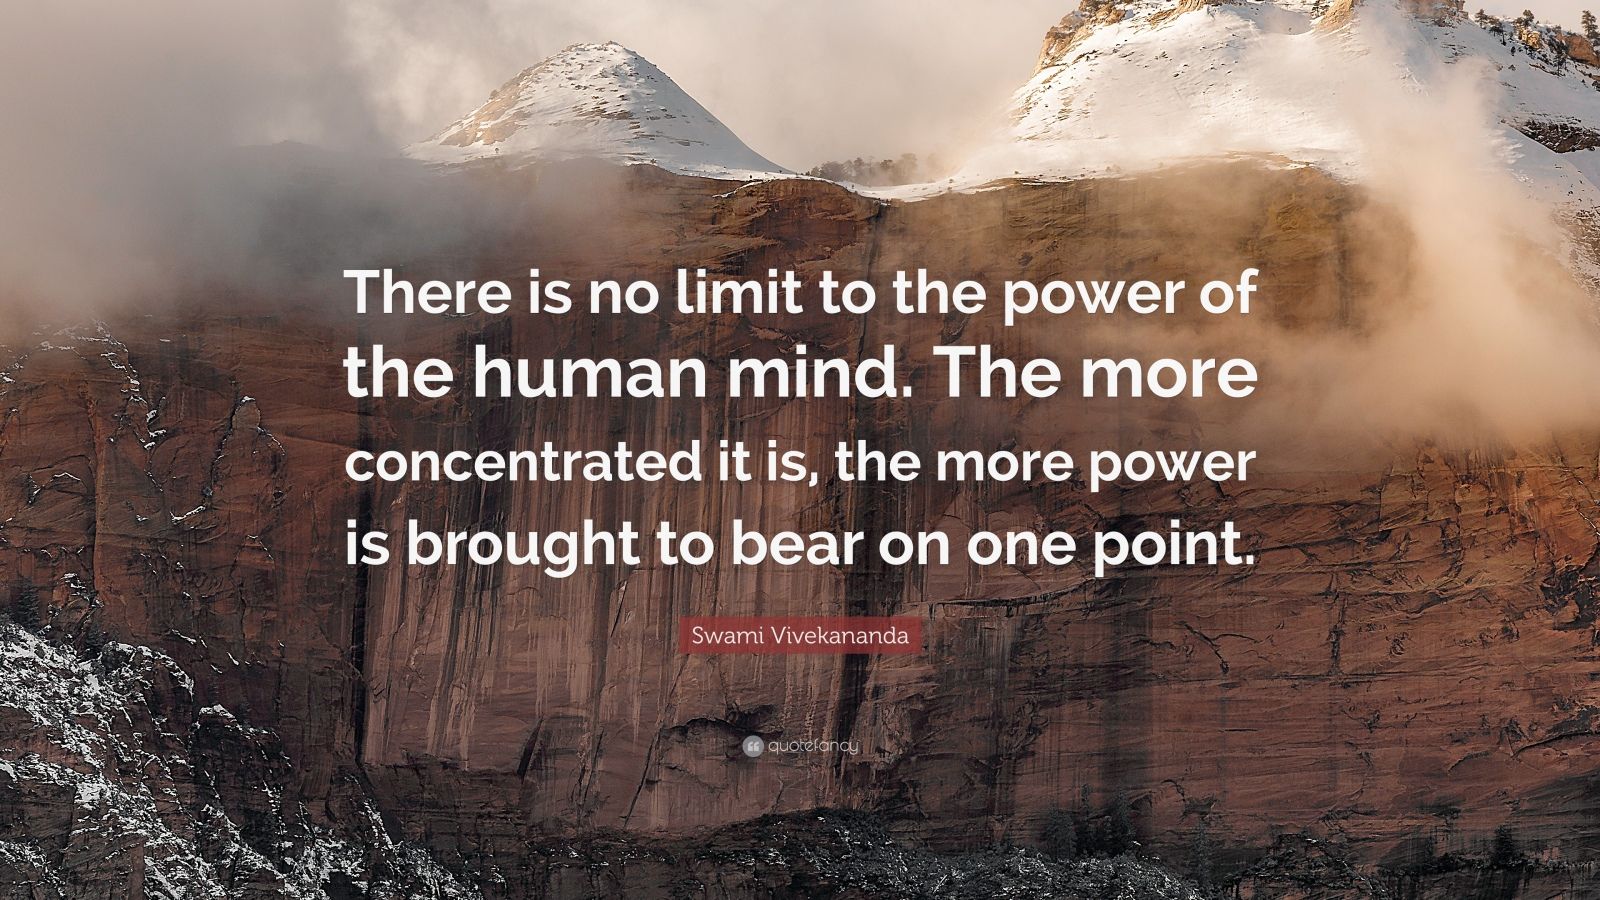 Swami Vivekananda Quote: “There is no limit to the power of the human ...